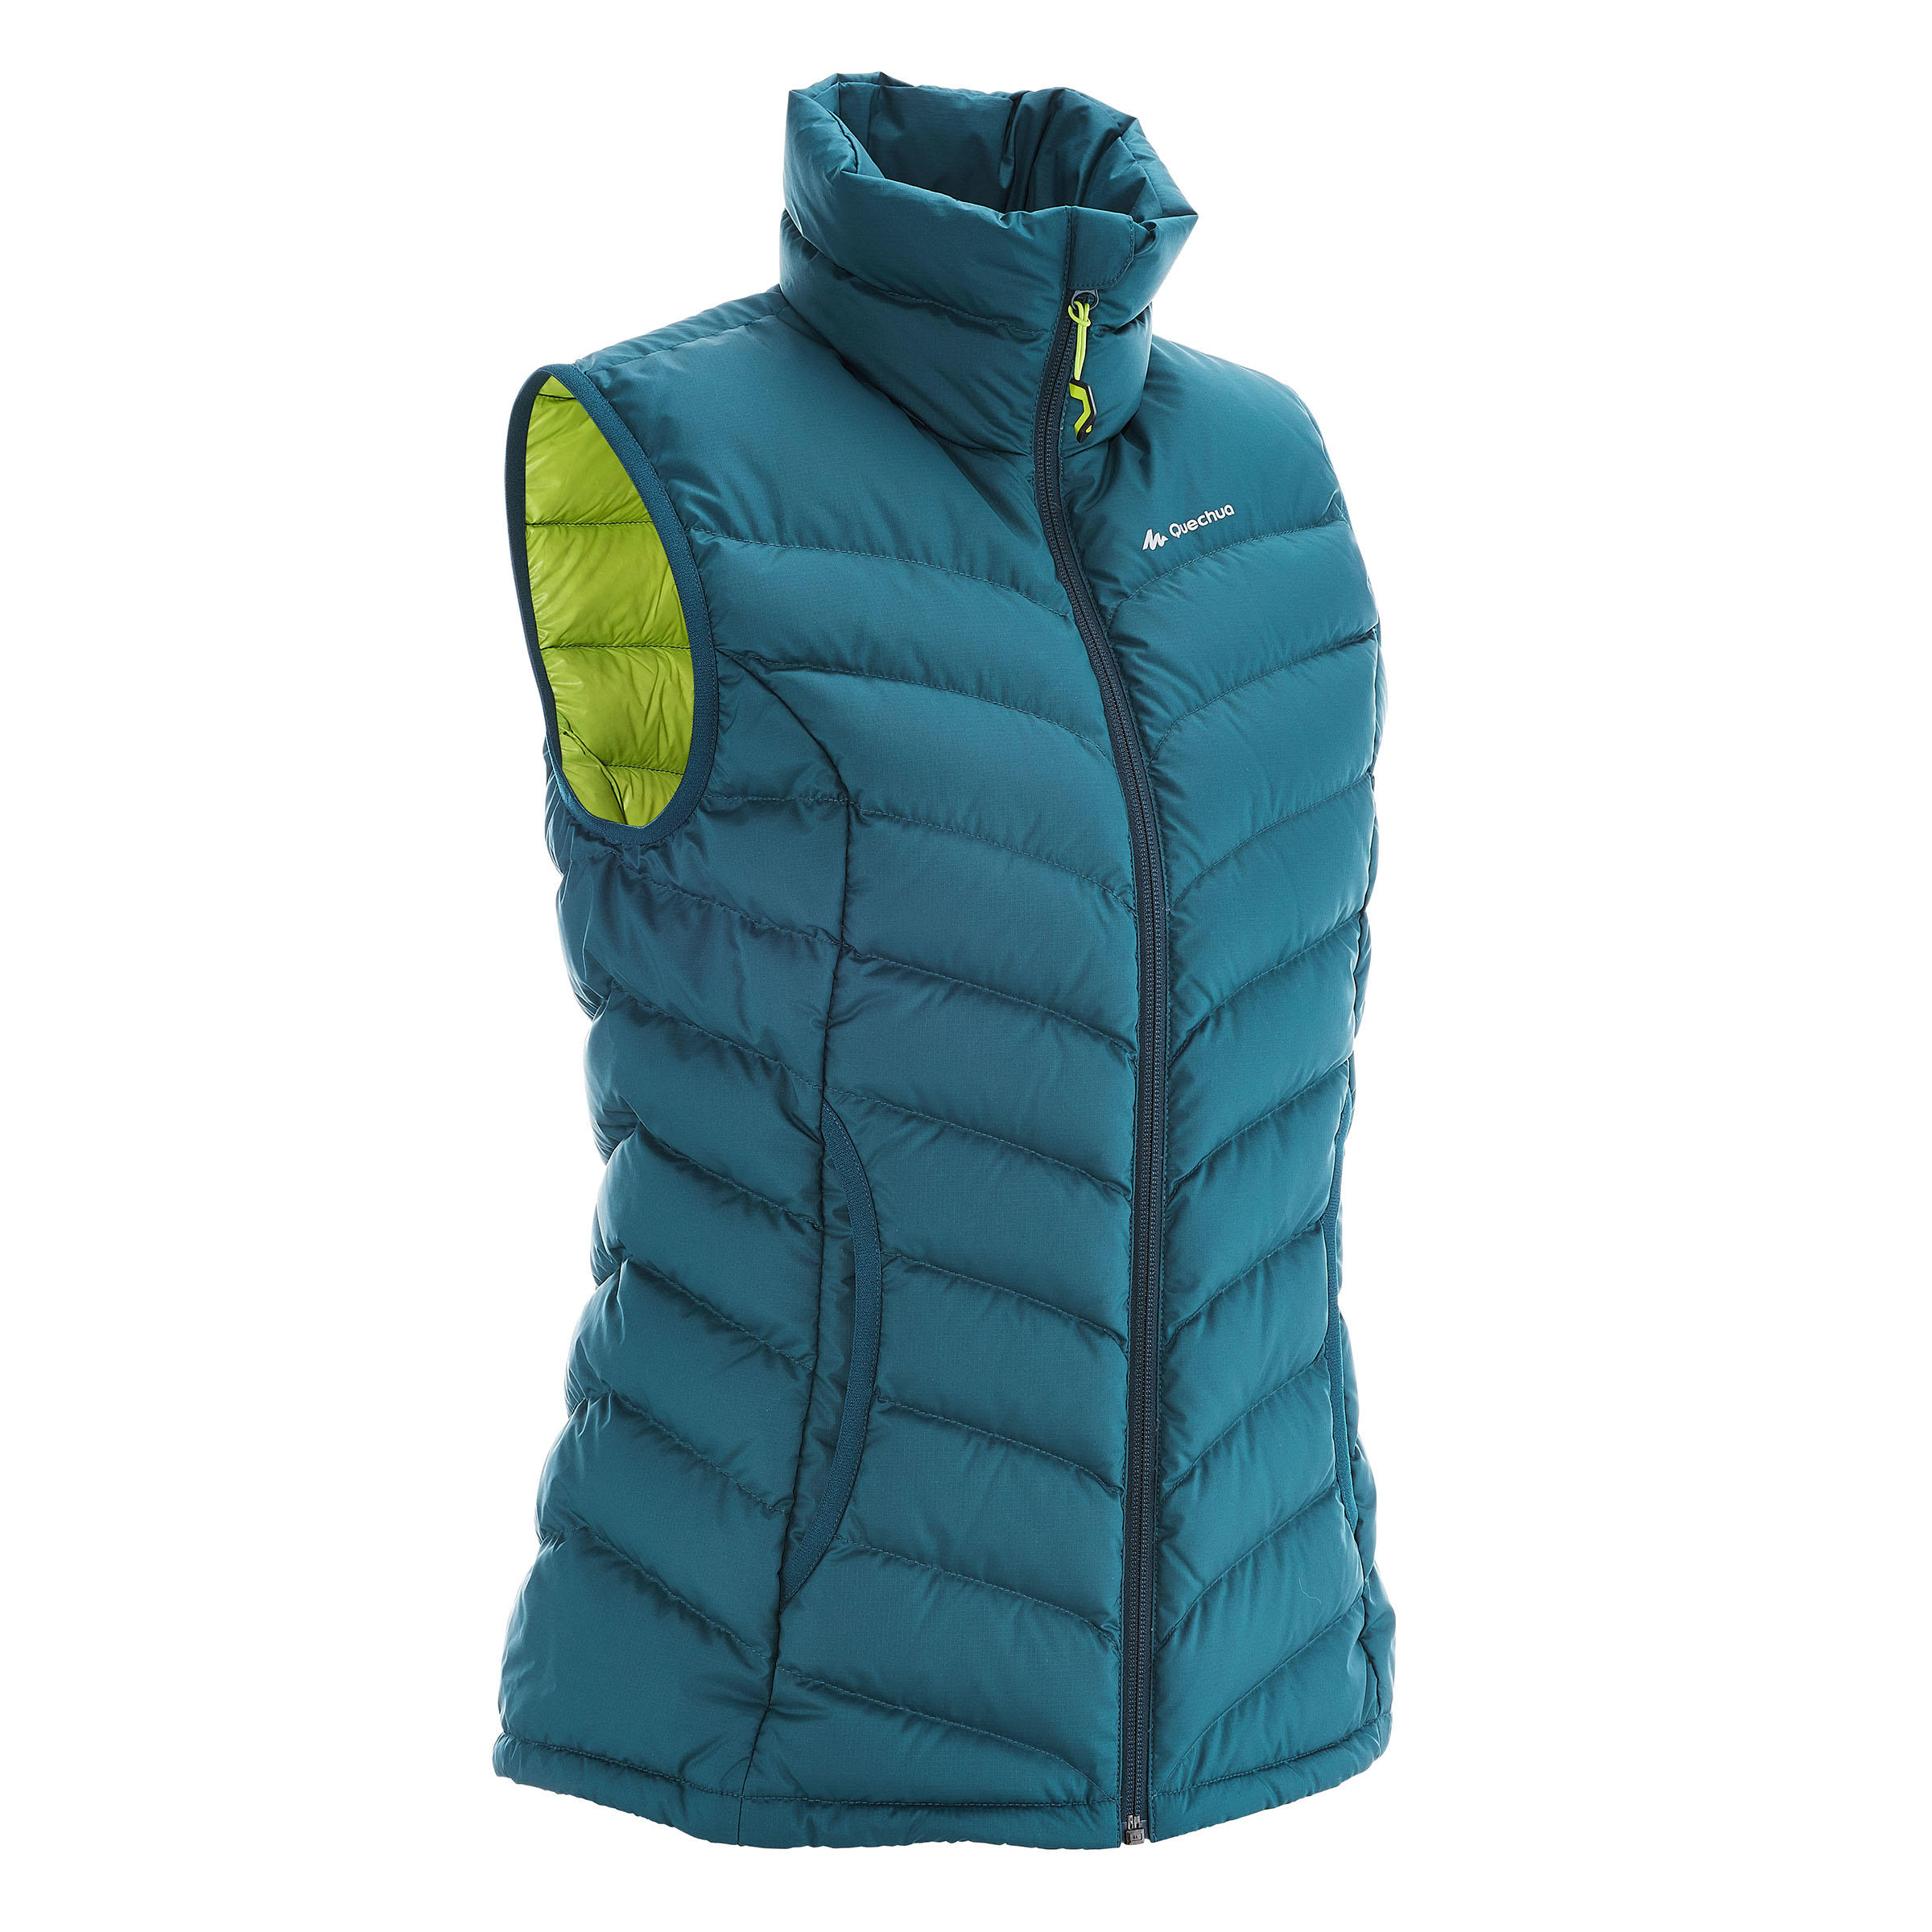 FORCLAZ Xwarm Full Down Women's Hiking Gilet (sleeveless quilted jacket) - Blue